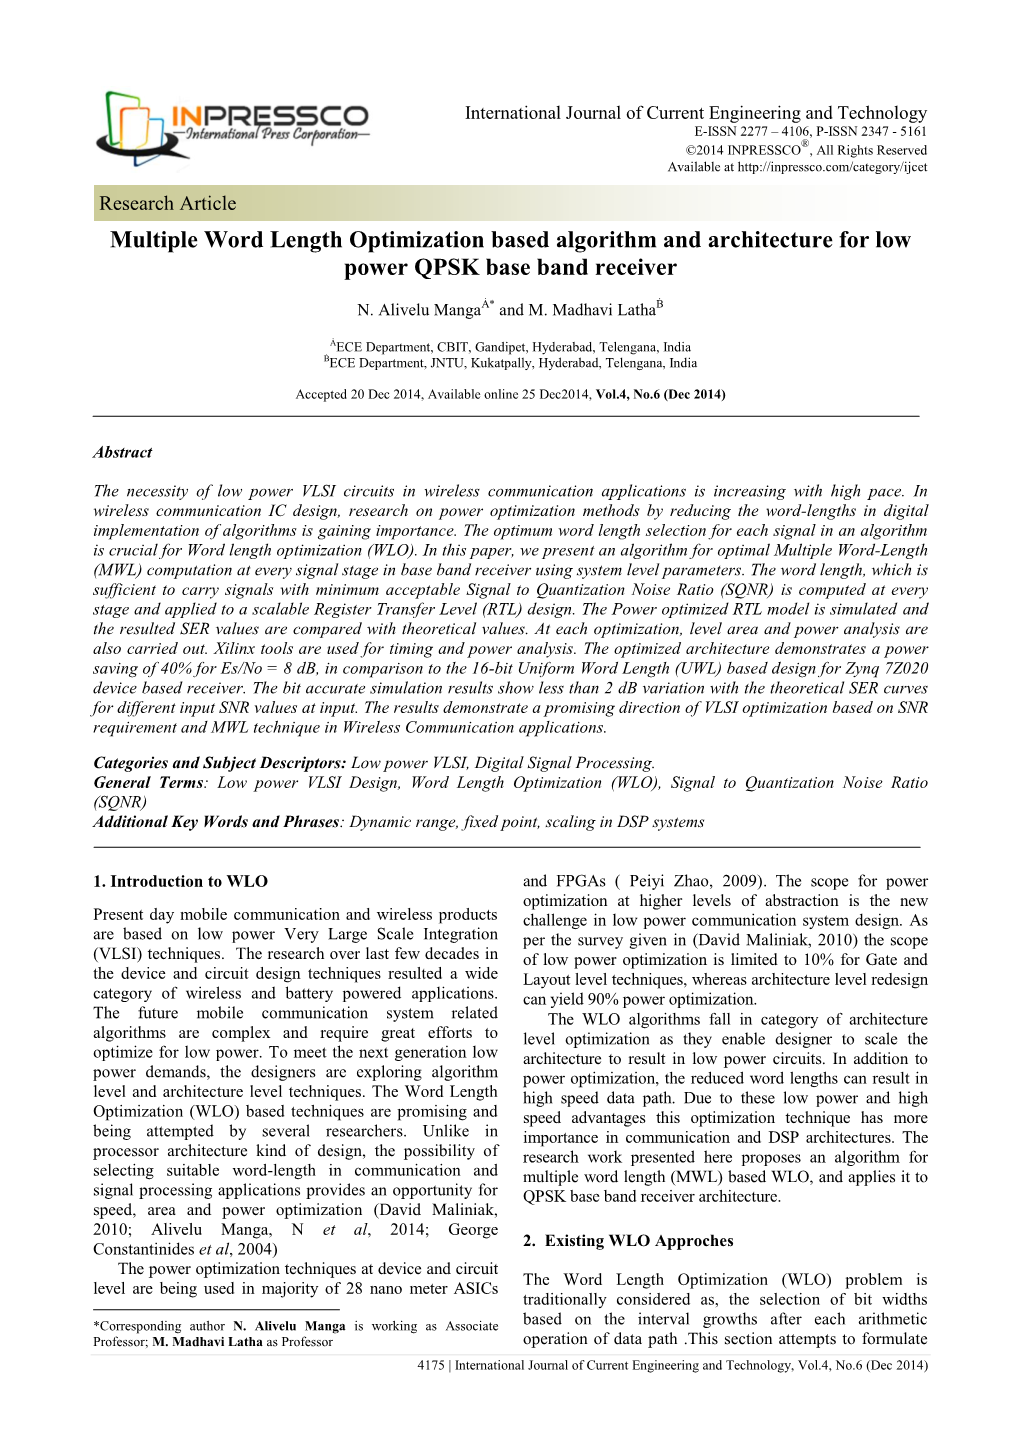 Multiple Word Length Optimization Based Algorithm and Architecture for Low Power QPSK Base Band Receiver